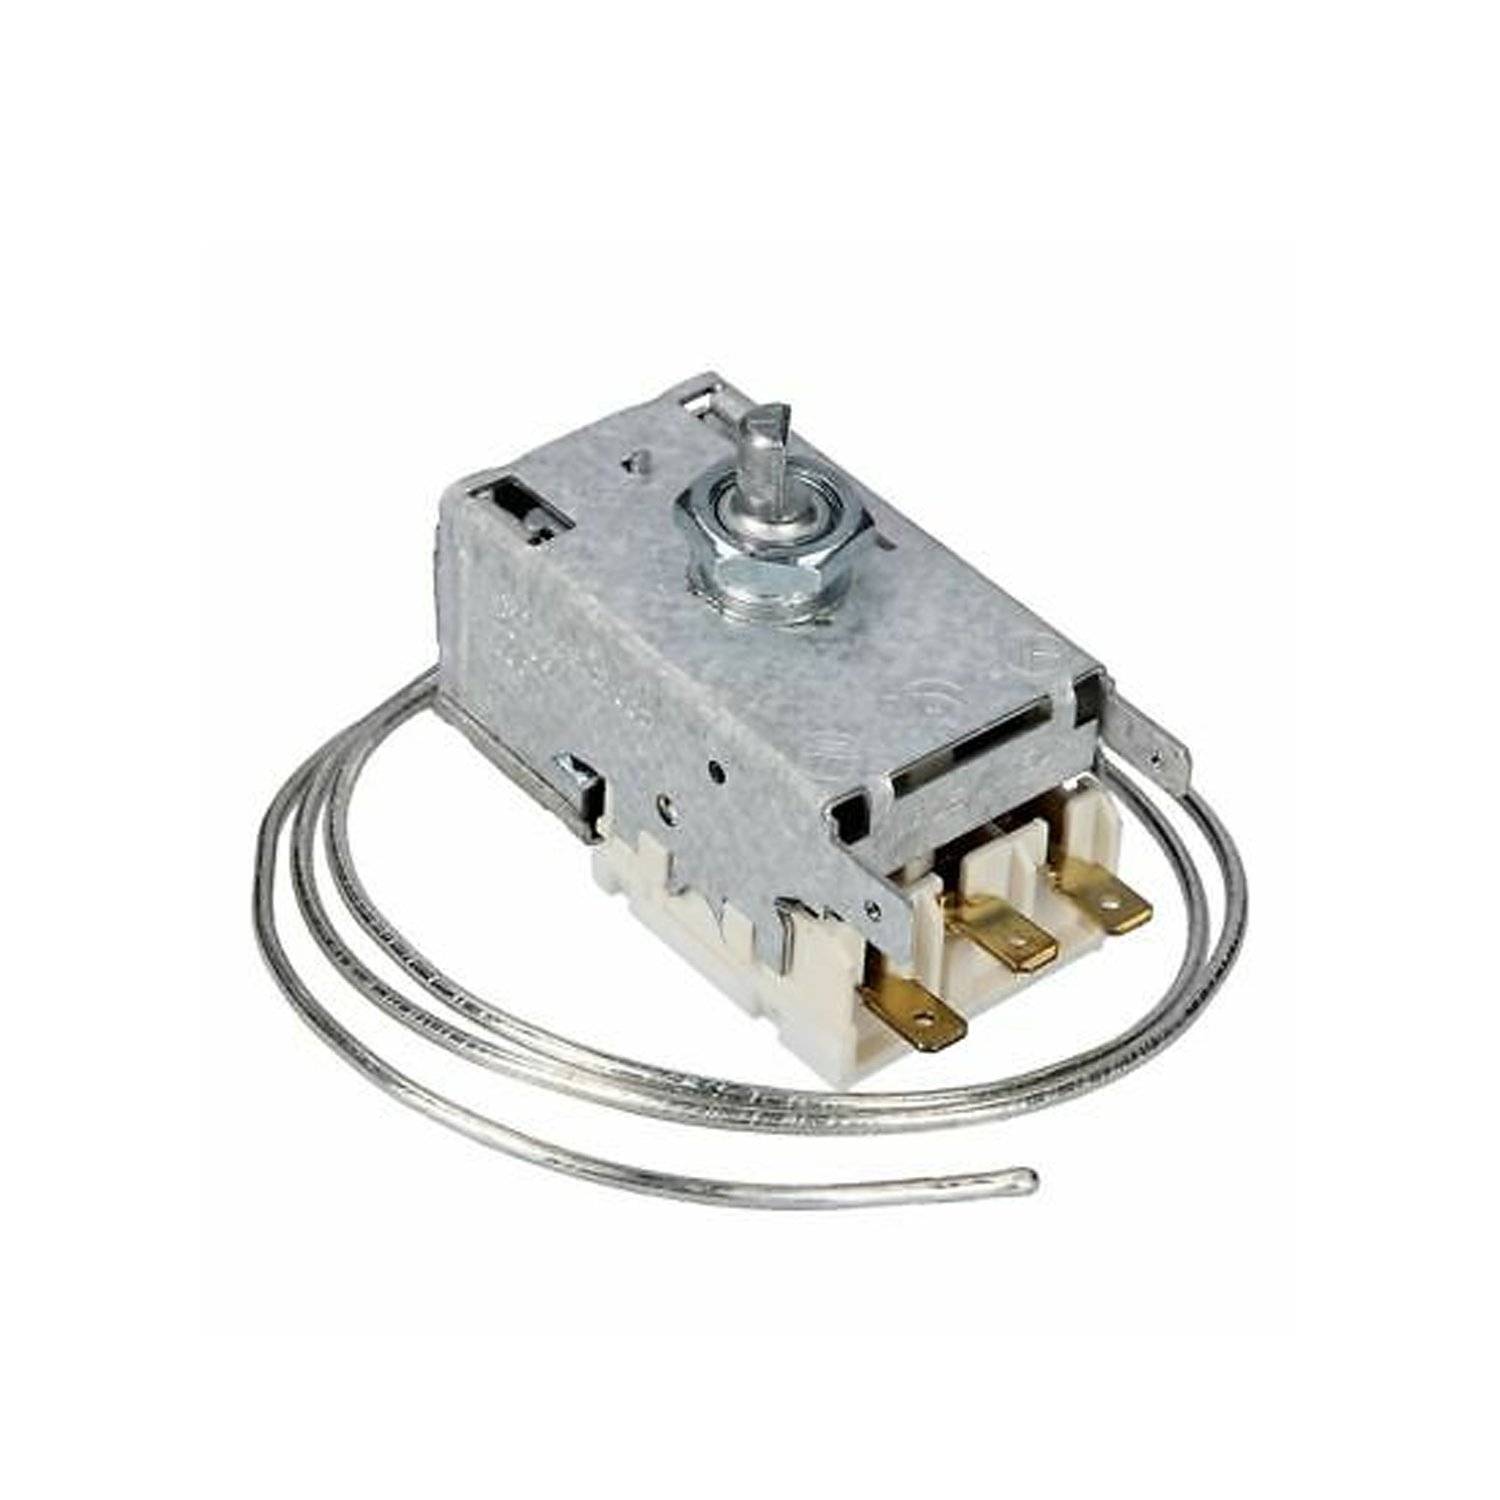 THERMOSTAT RANCO K59-L2146,3 contacts, tube capillaire: 820mm